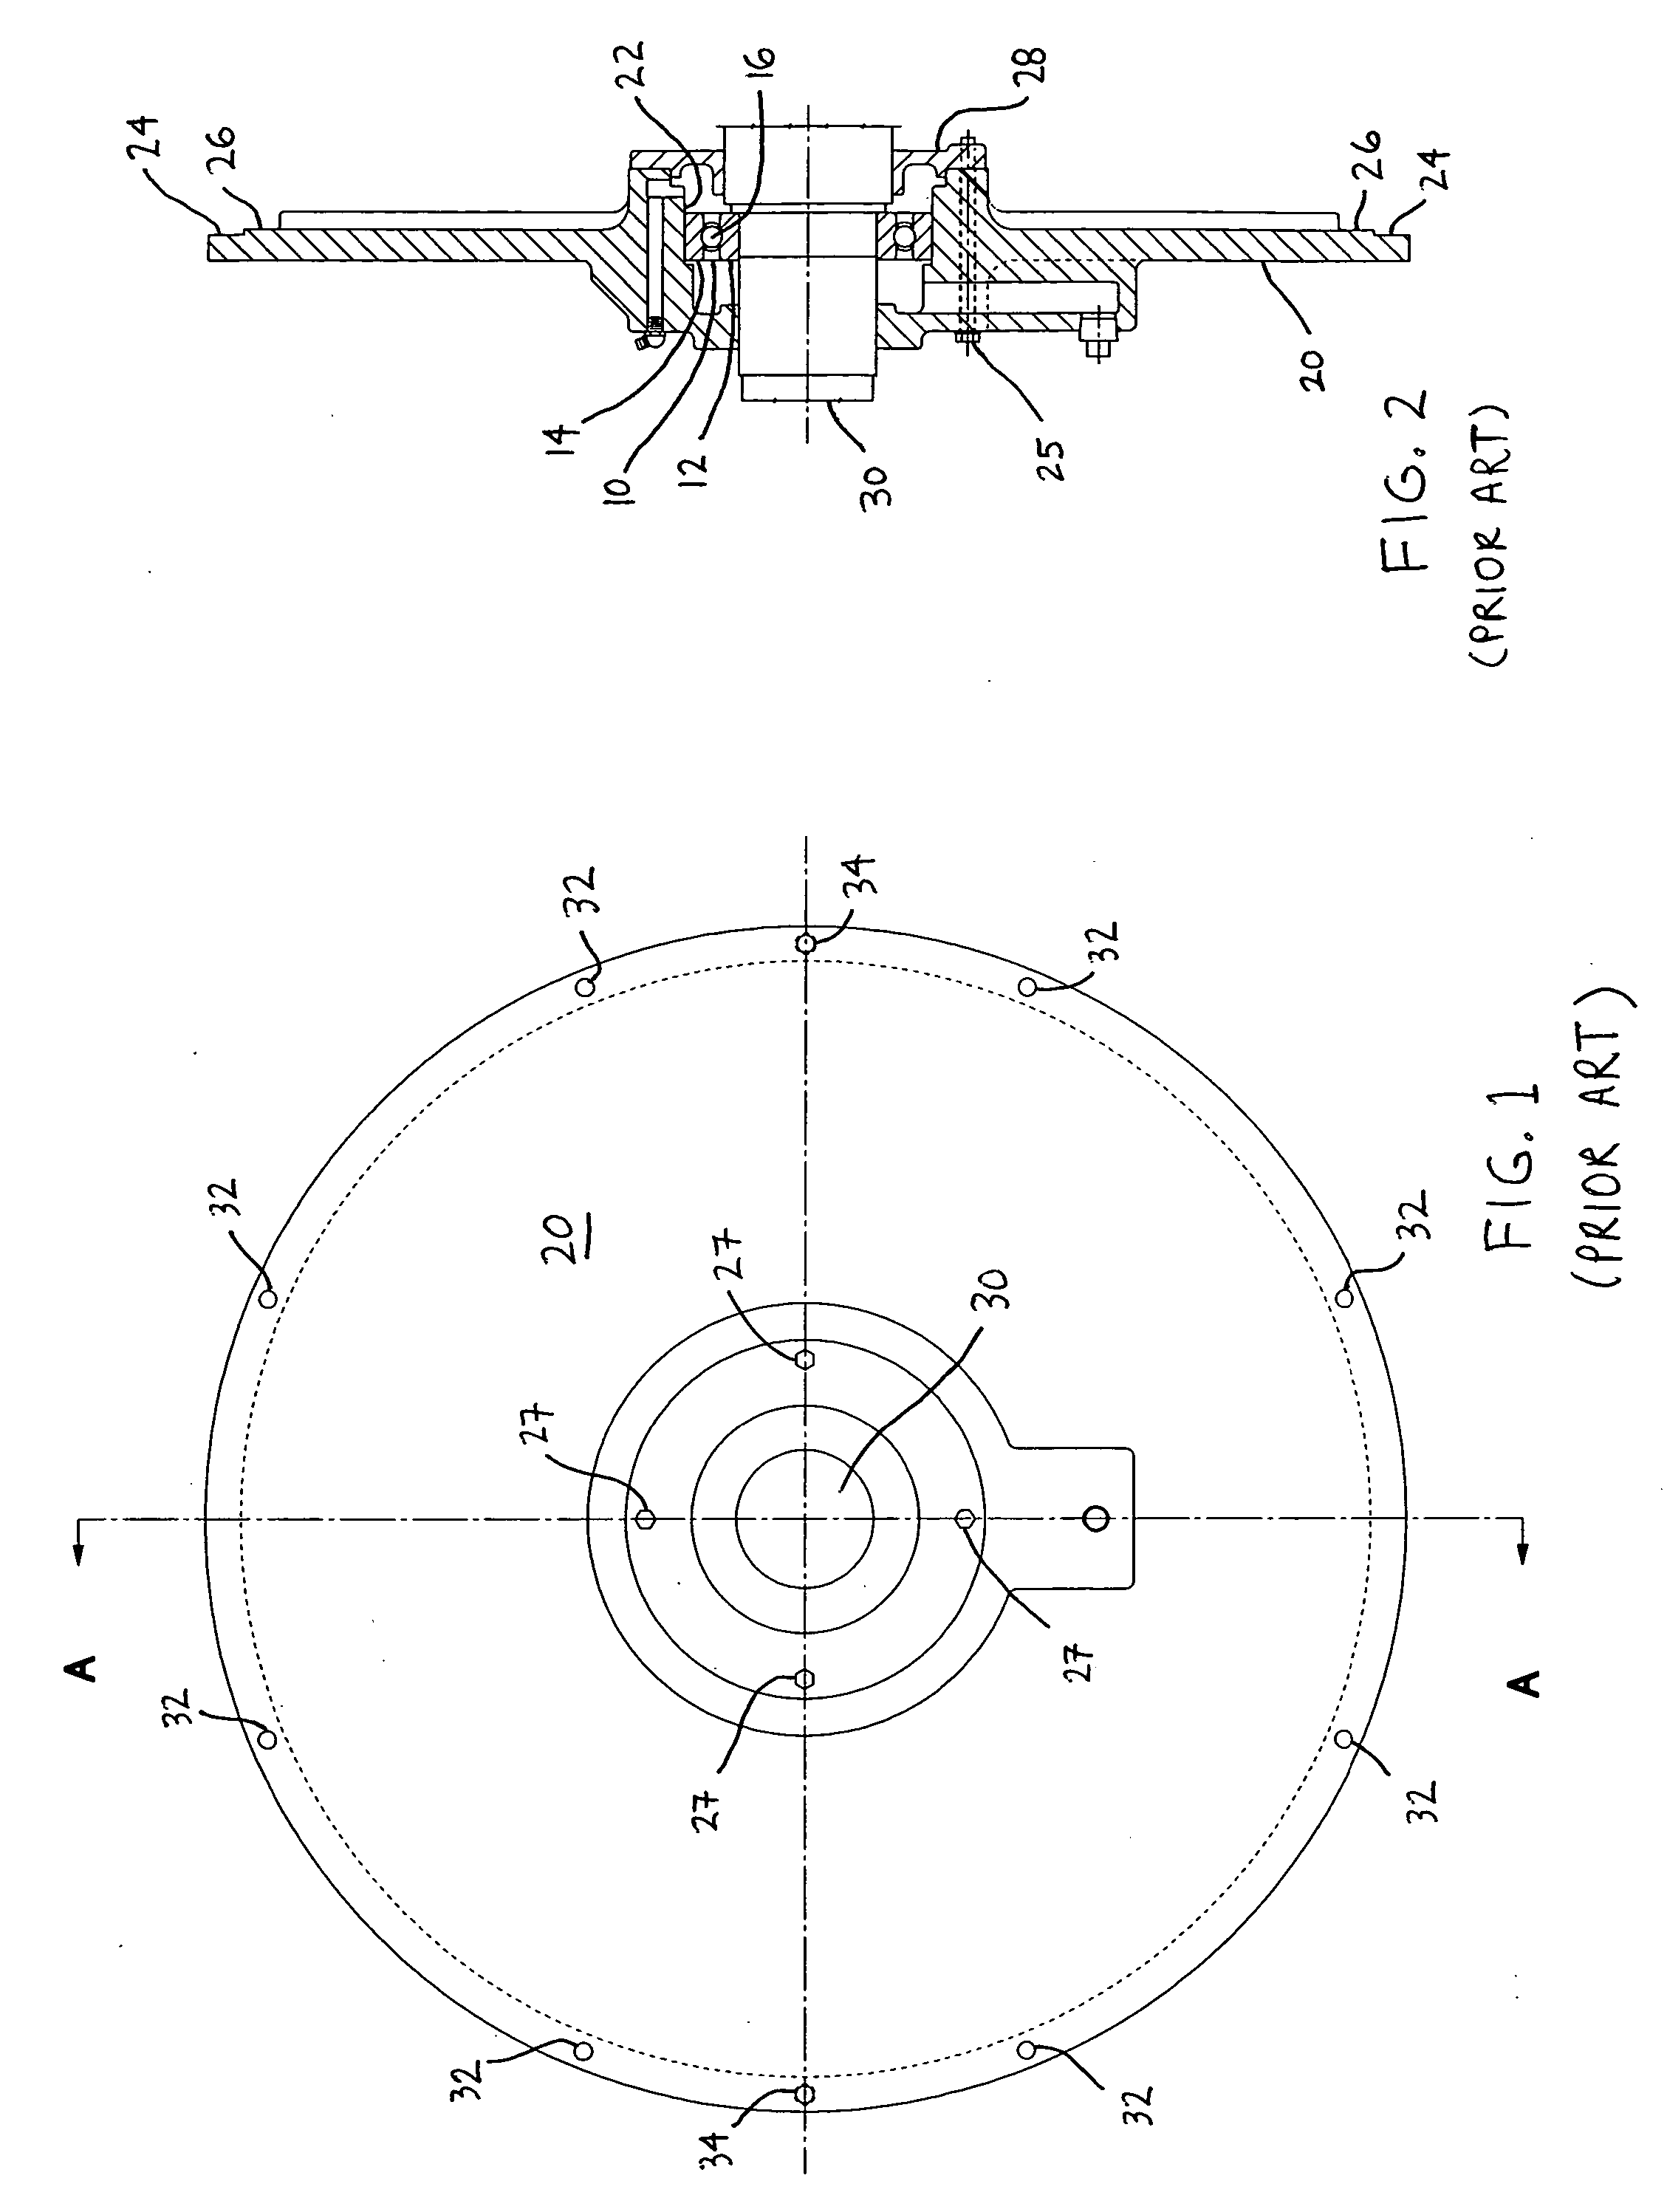 Load distribution devices and insulated bearing assemblies